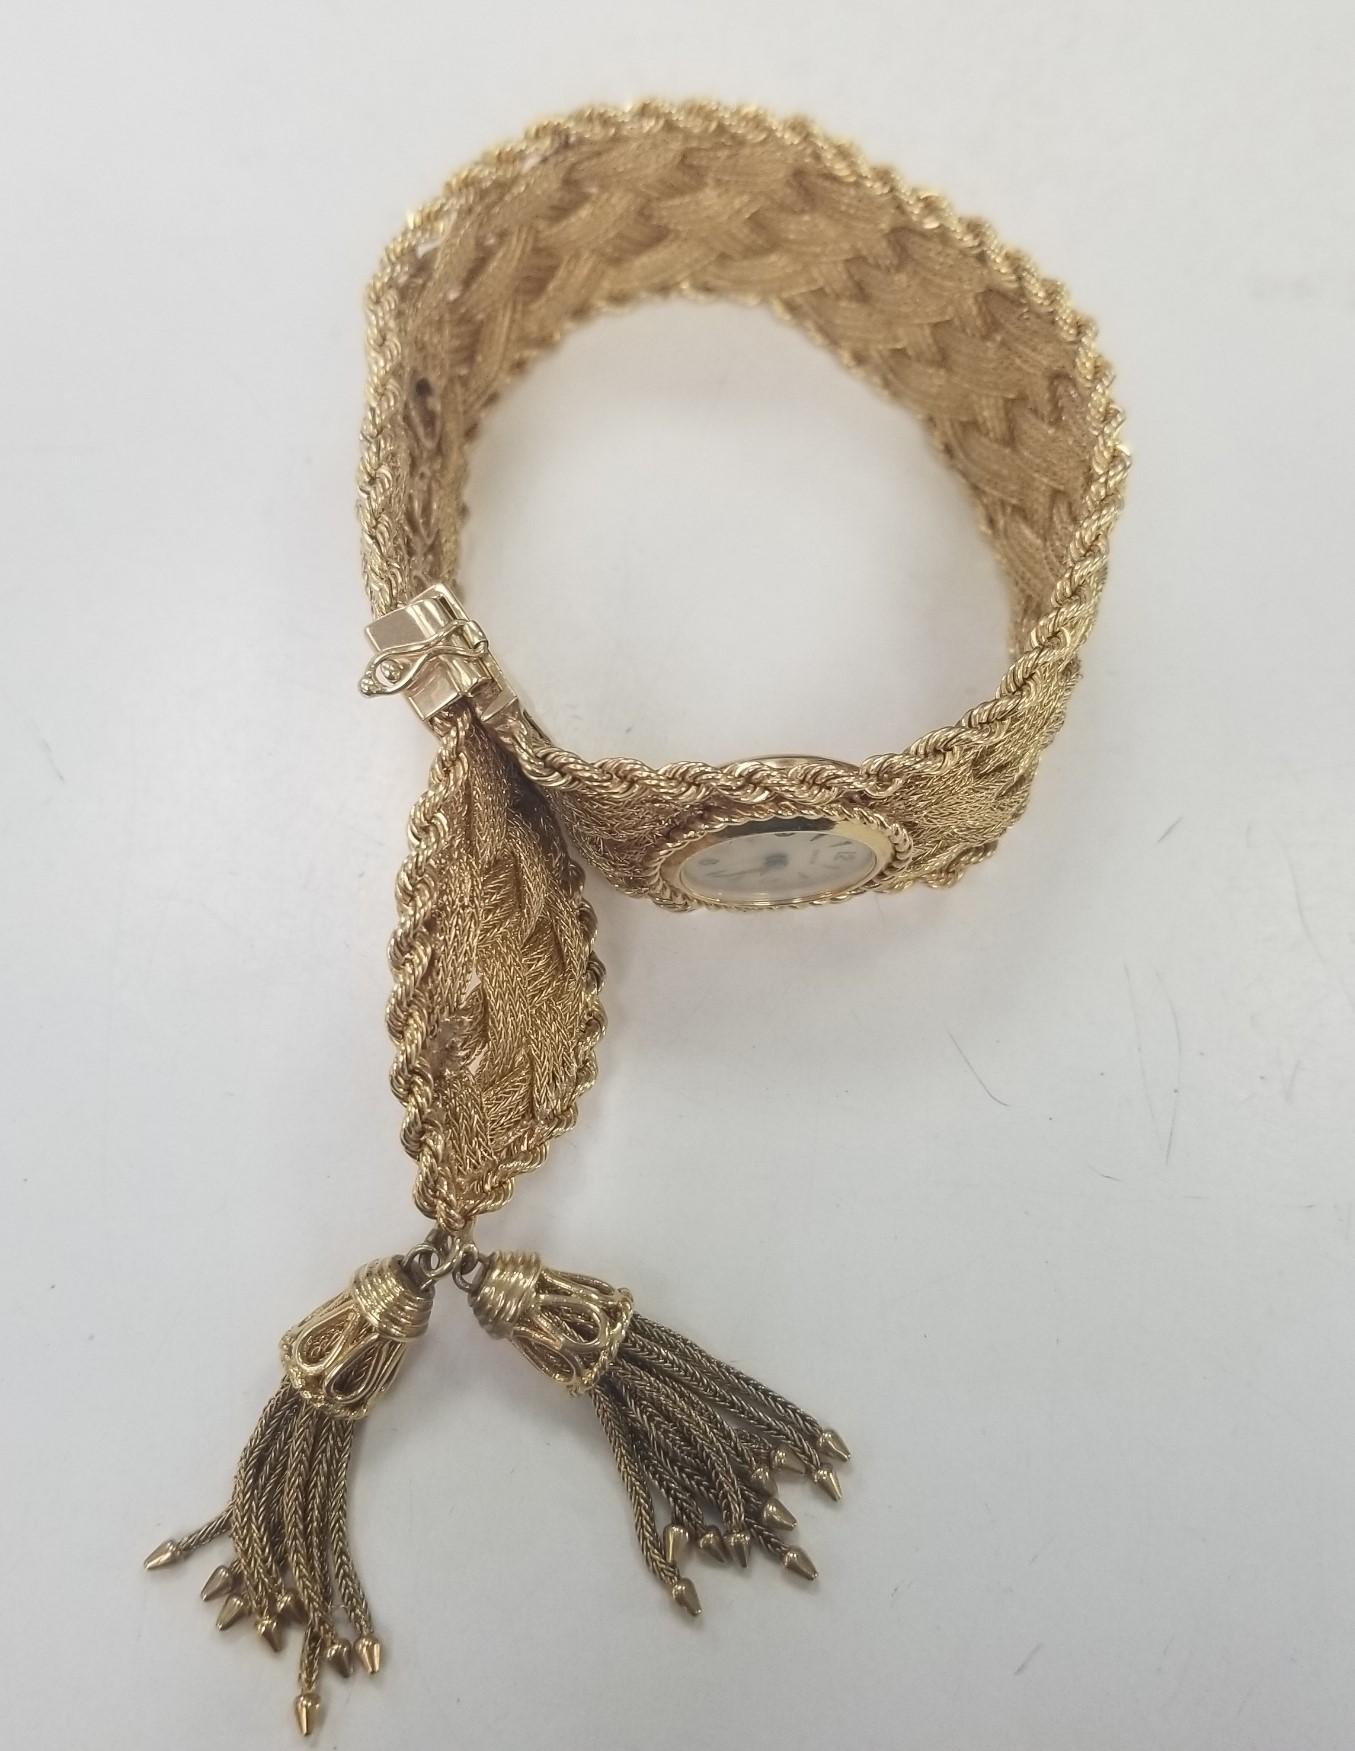 Vintage Geneve 14 Karat Yellow Gold Woven and Rope Bracelet Watch with Tassels .  The watch has 4 adjustments 6 inches -7/5 inches with a safety pin and clasp.  The Watch has a brand new movement.  The width is 26mm and weighs 73 grams. 
